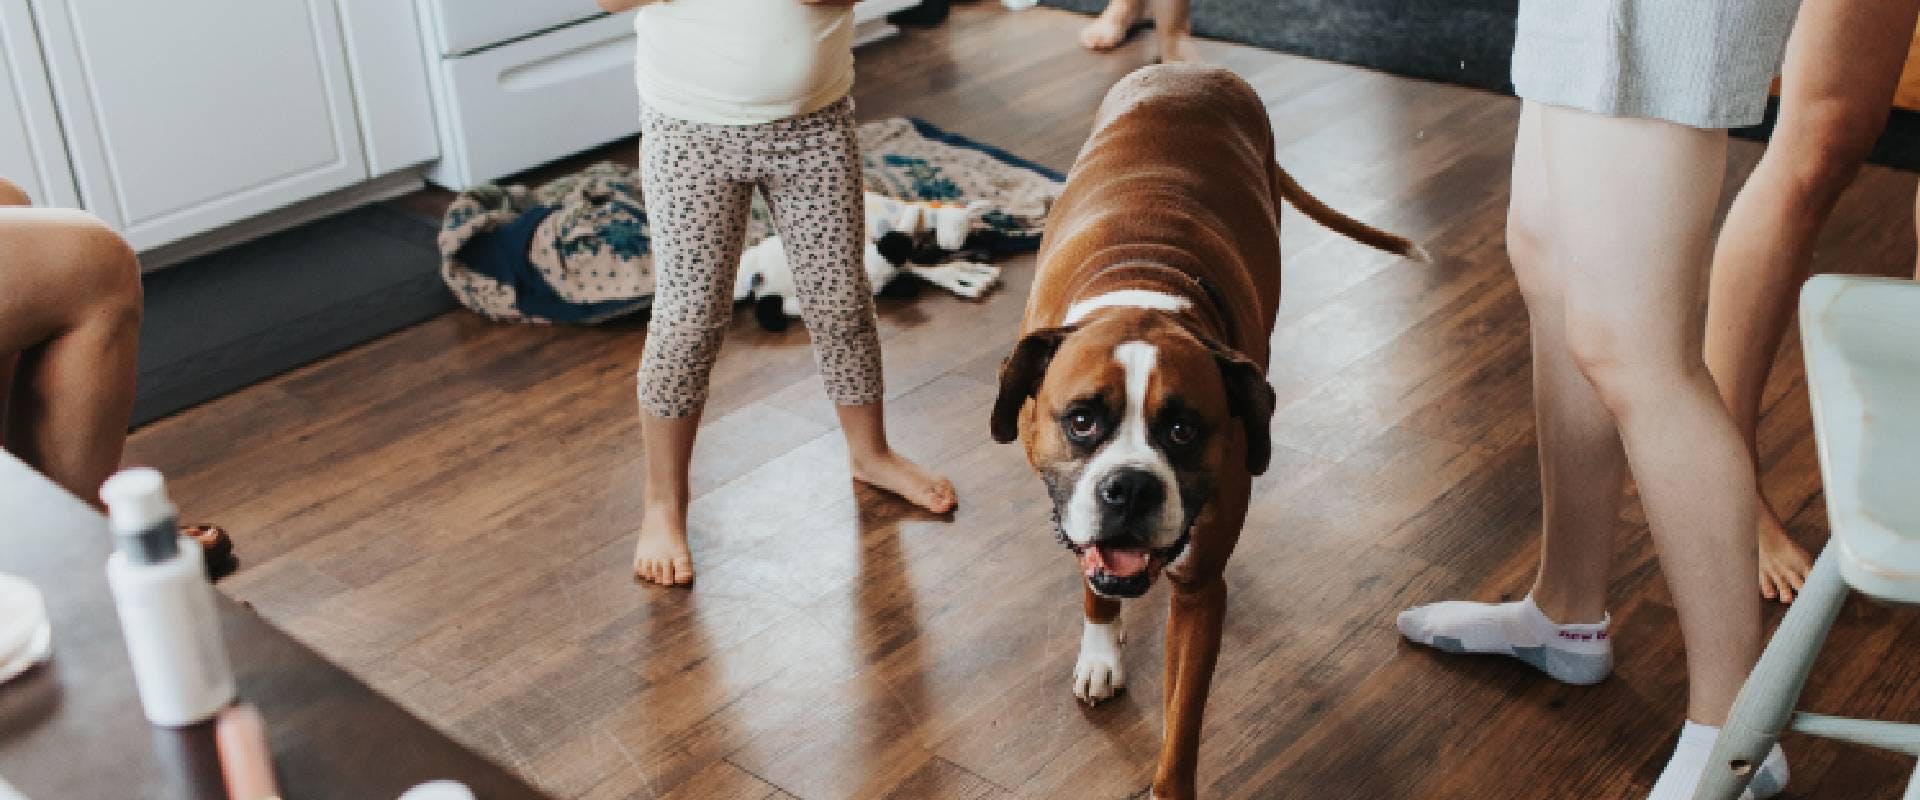 Boxer dog walking in a house